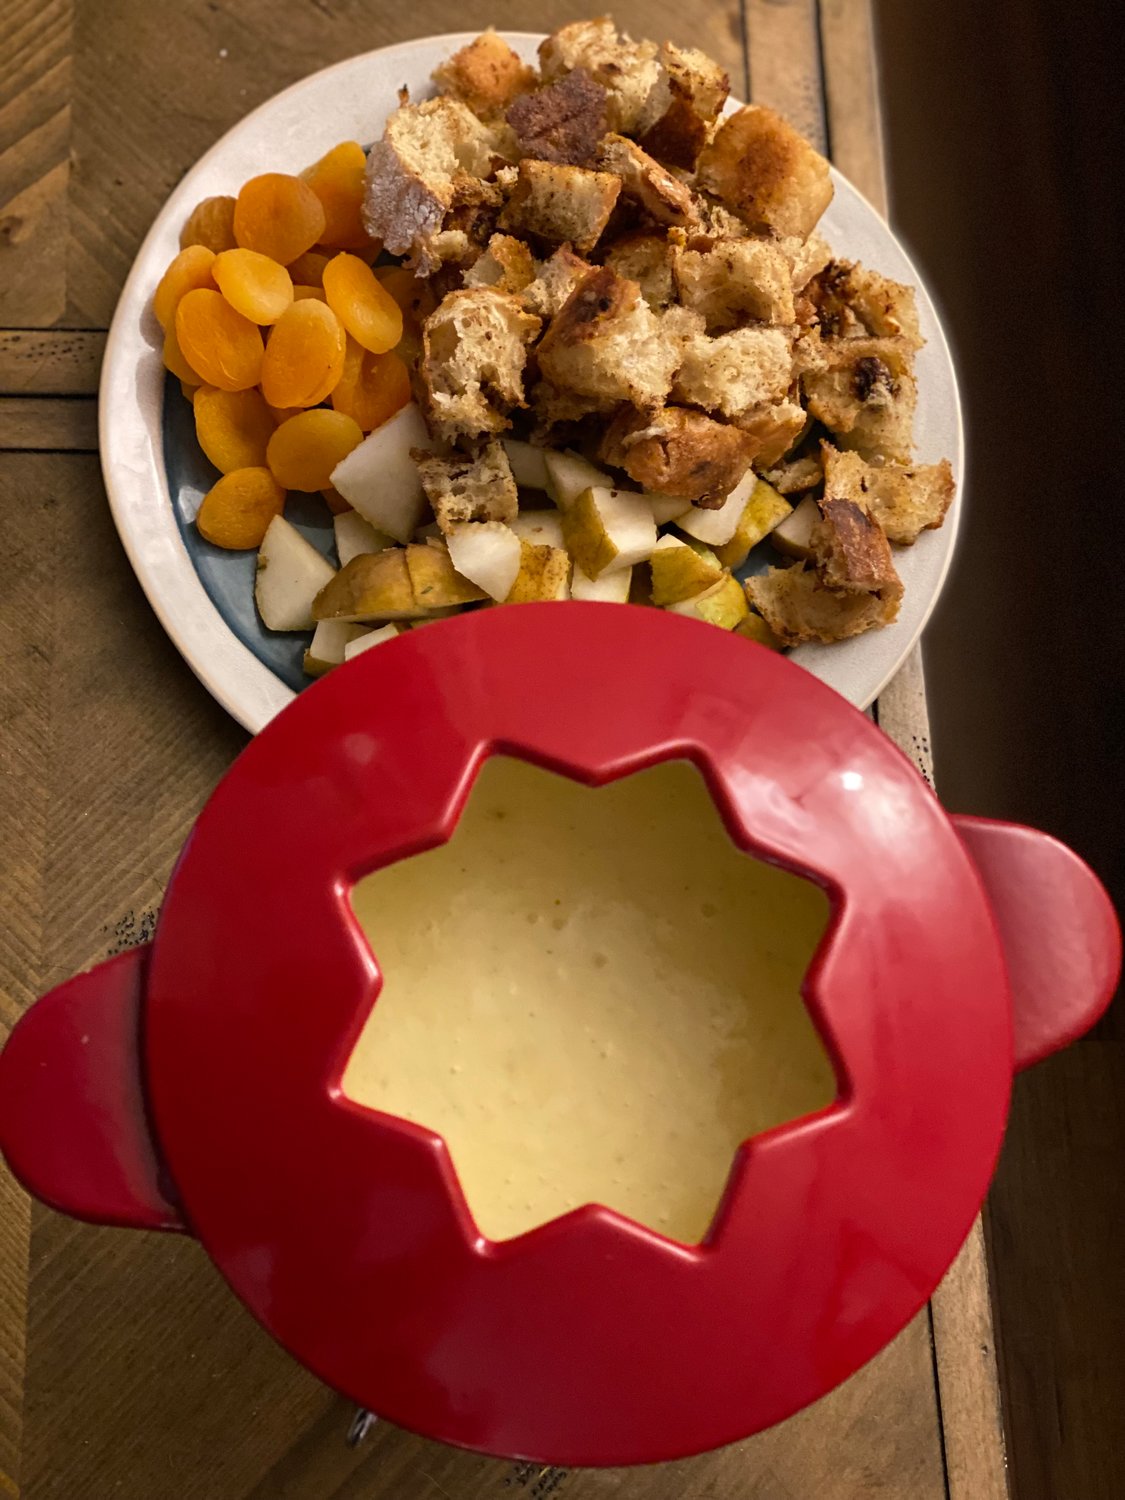 This recipe for a Classic Swiss Cheese Fondue you’ll want to cut out and save for a great entertaining party.